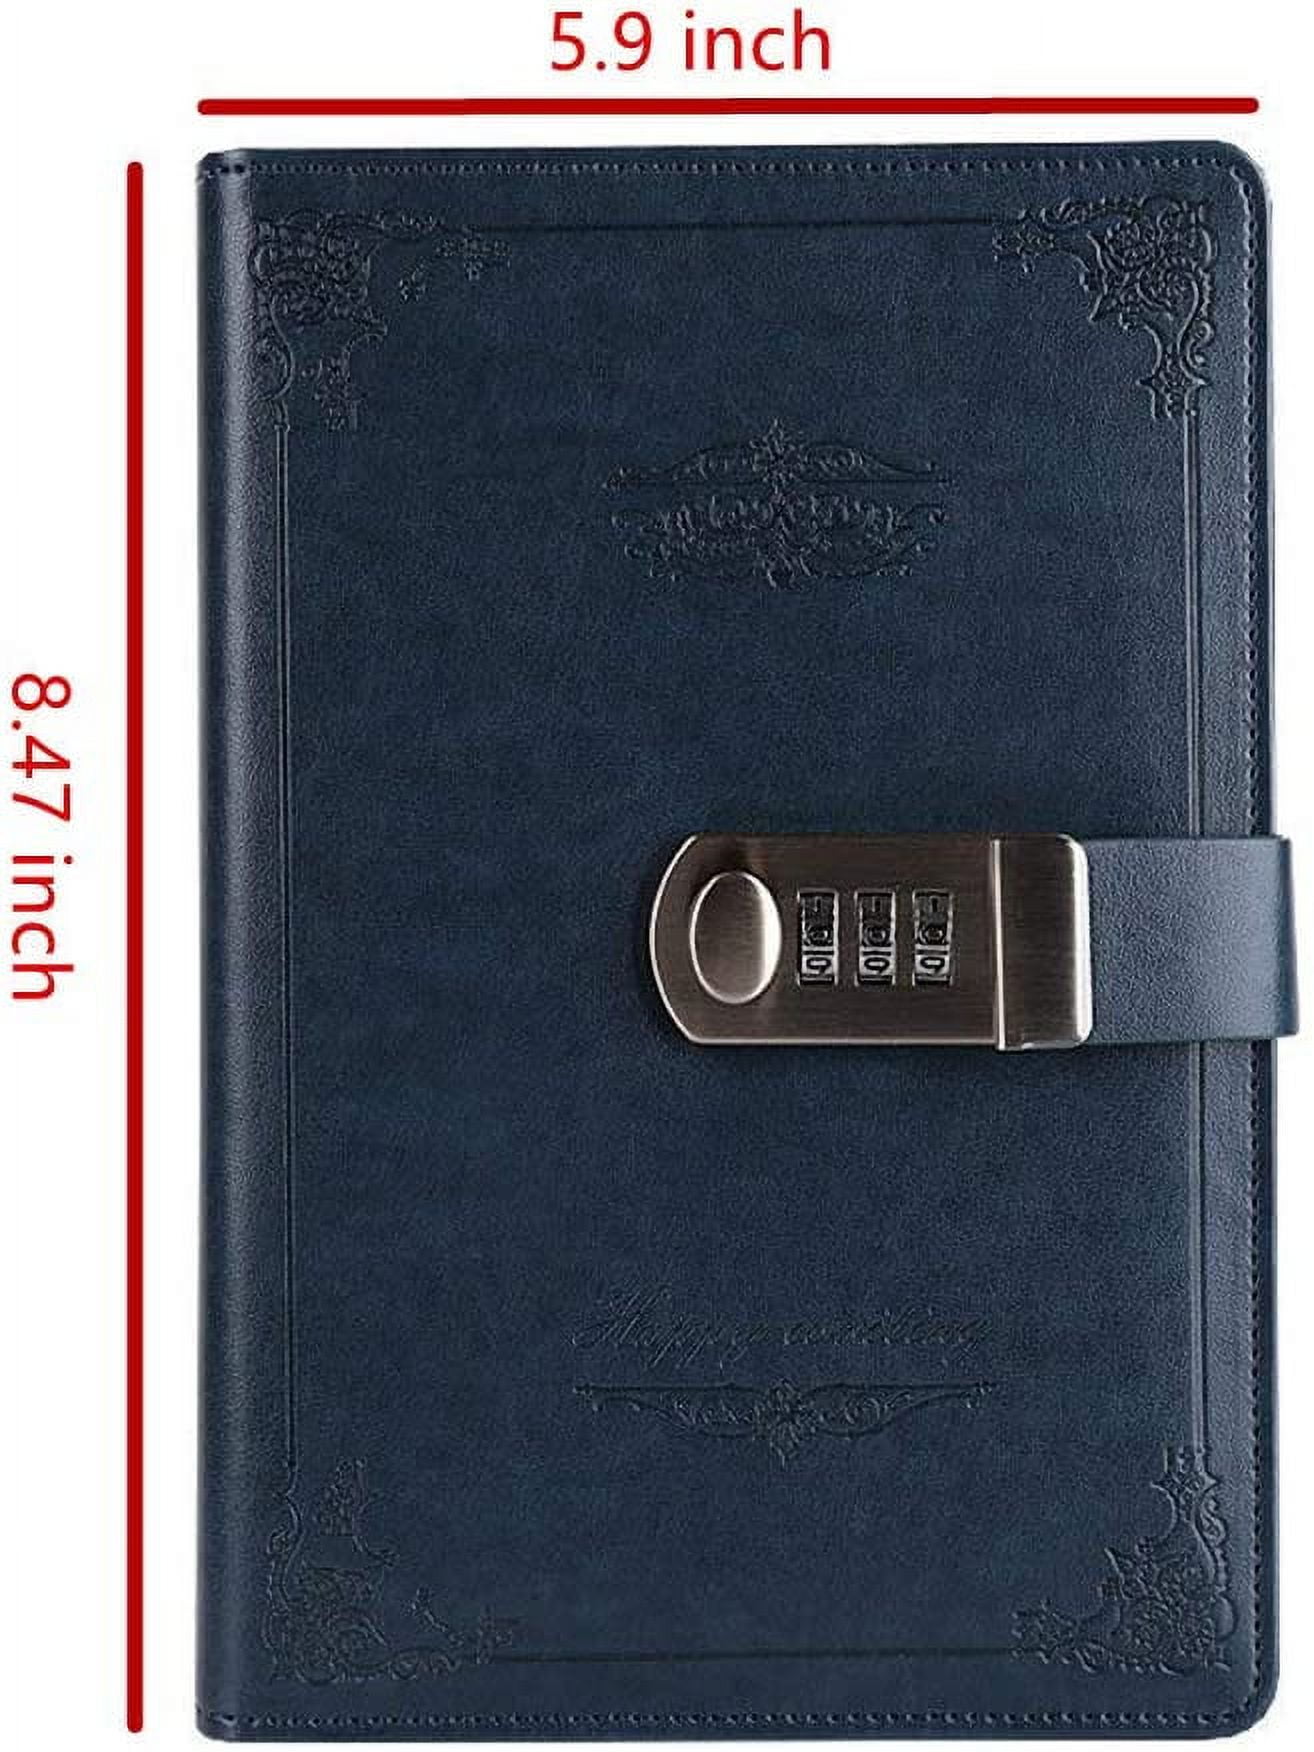 Classic Journal with Password Lock and Pen Holder - Notebookpost